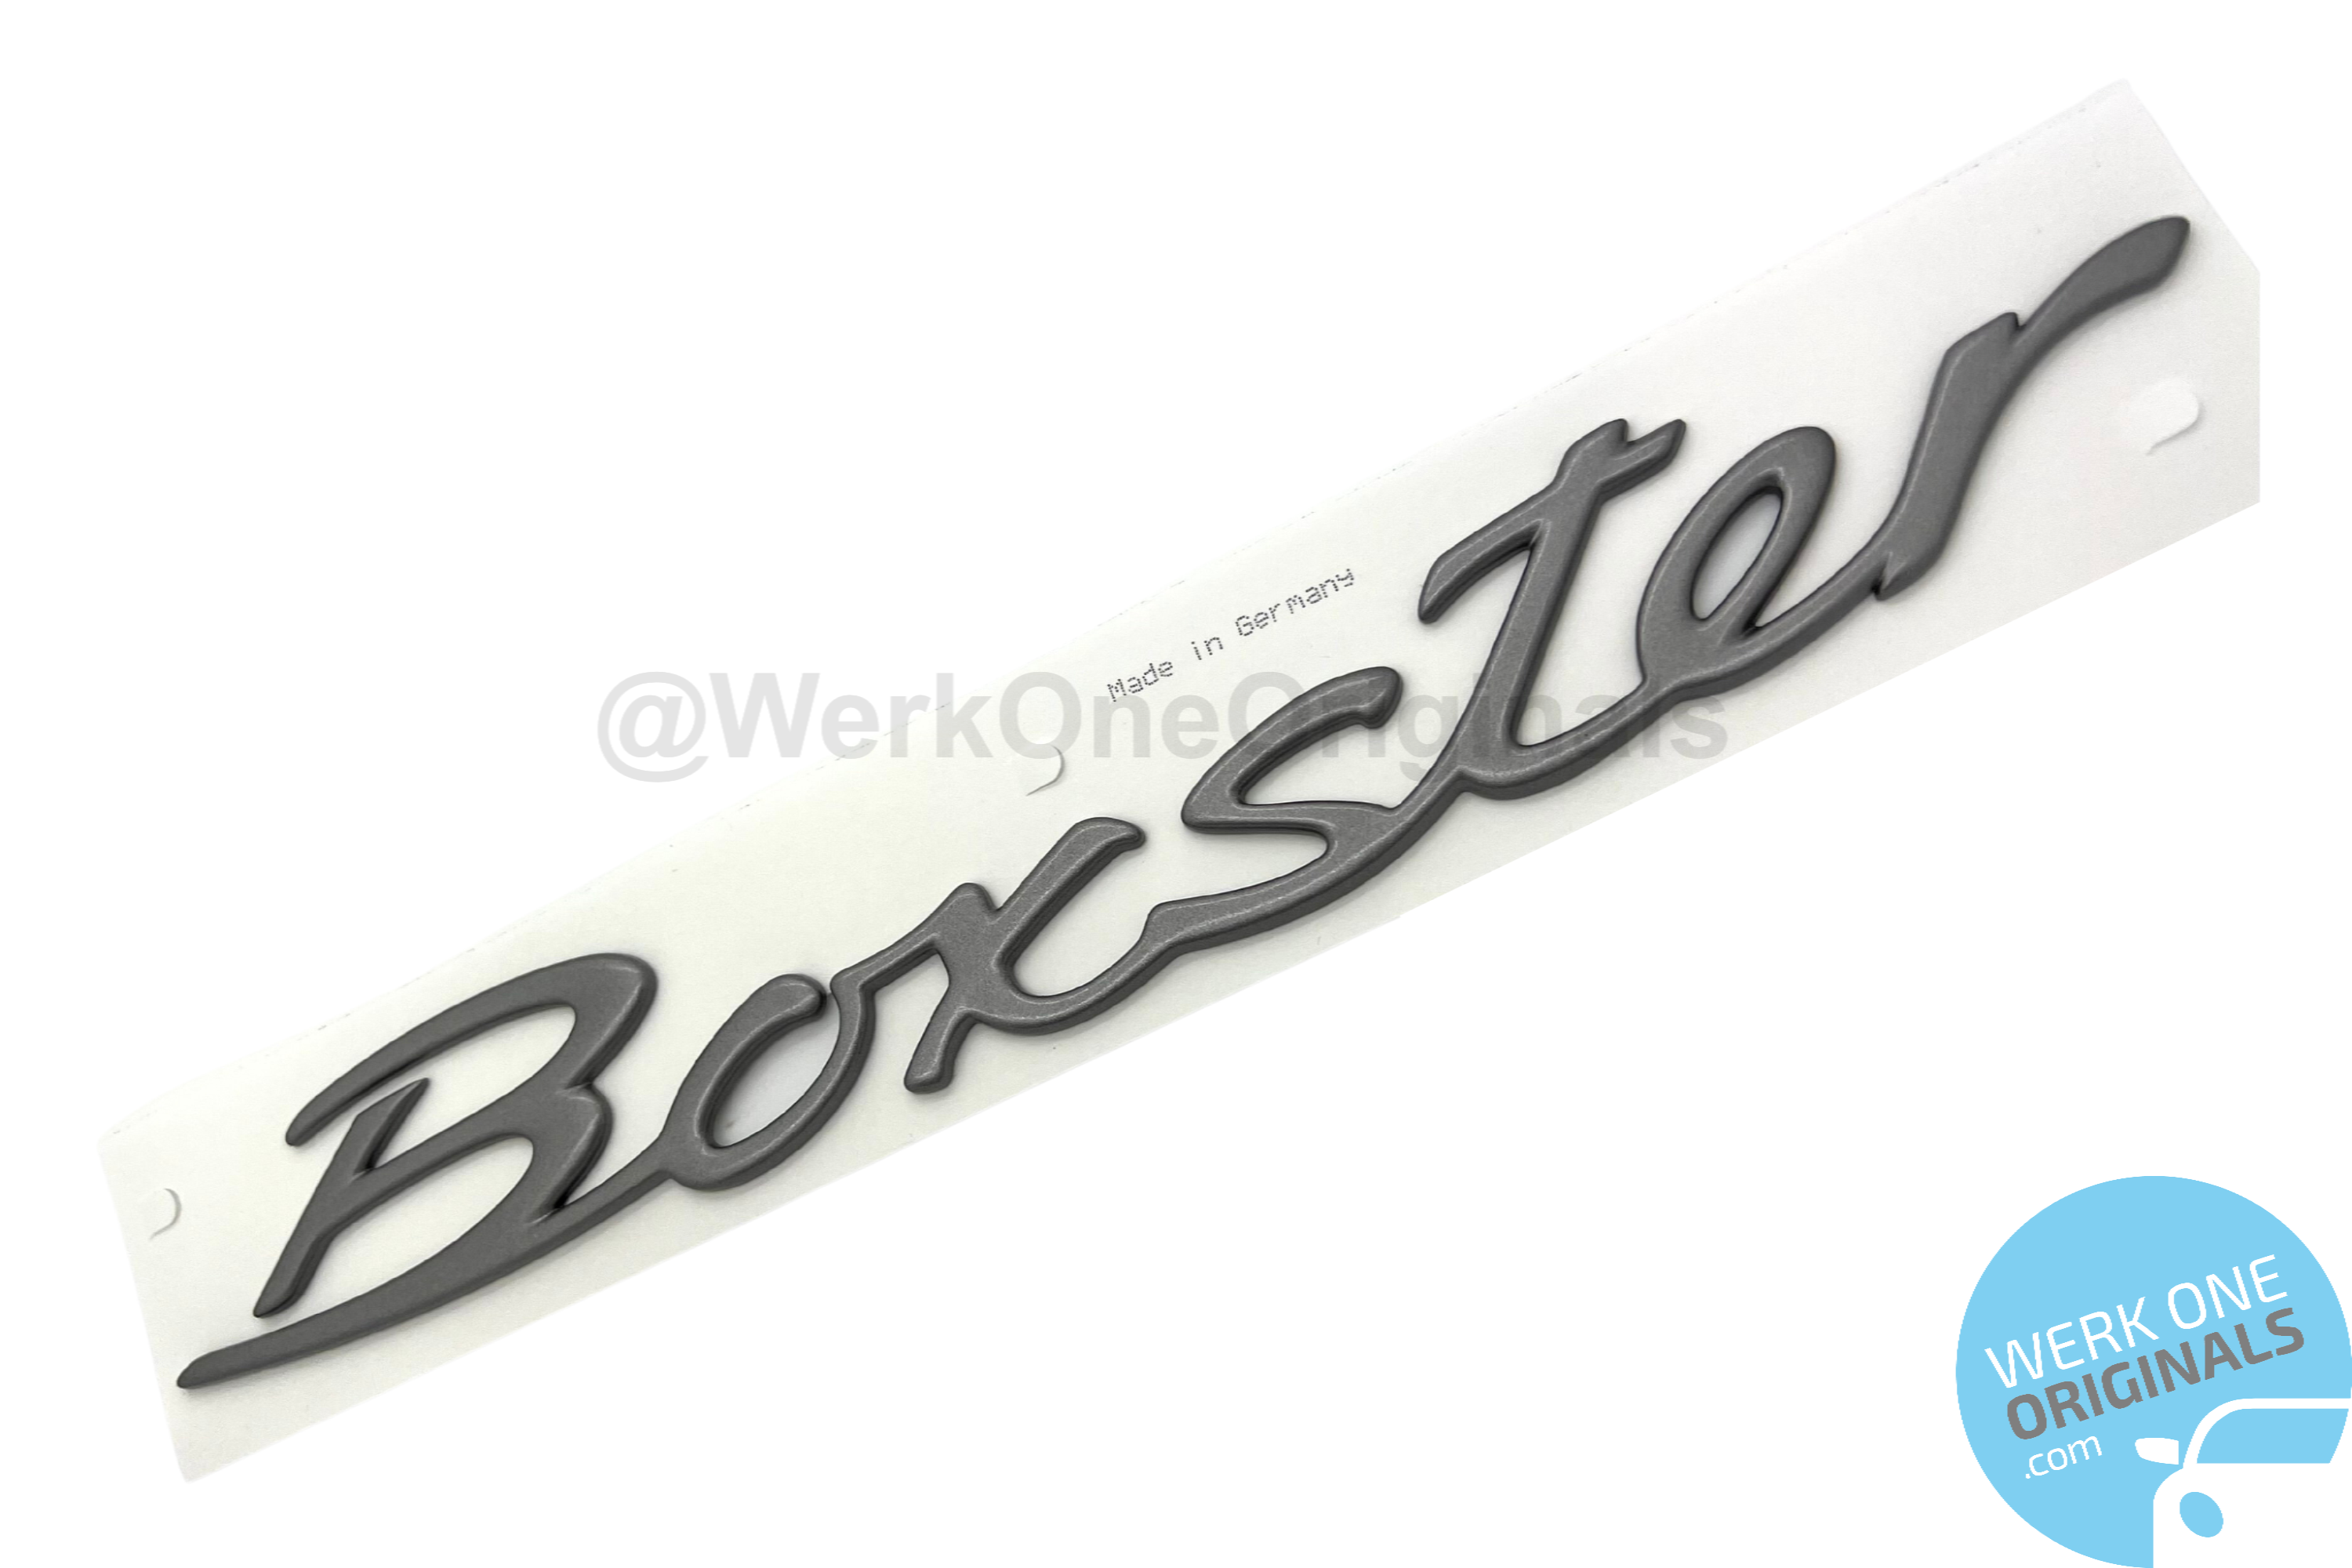 Porsche 'Boxster' Rear Badge in Titanium Grey for Boxster Type 986 Models